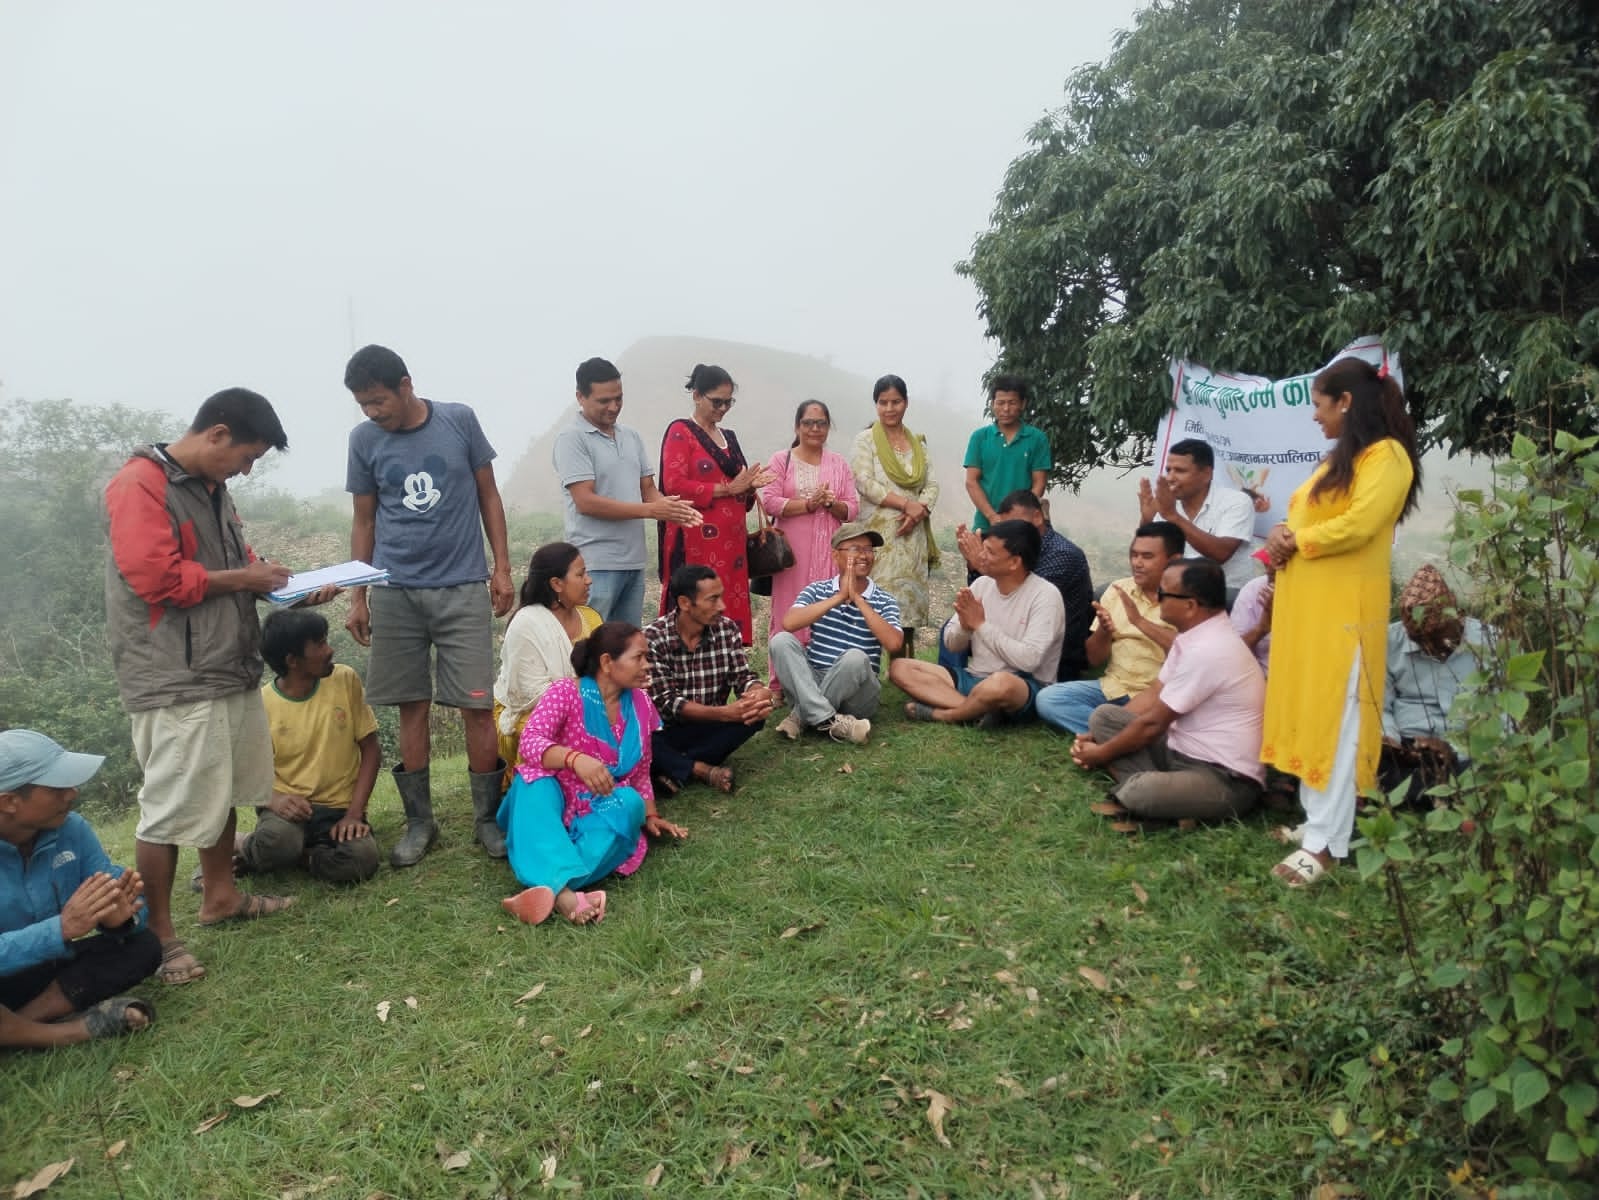 Successful Tree Planting Program Concludes in Tulsipur 3 Balle, Promoting Collaboration and Conservation